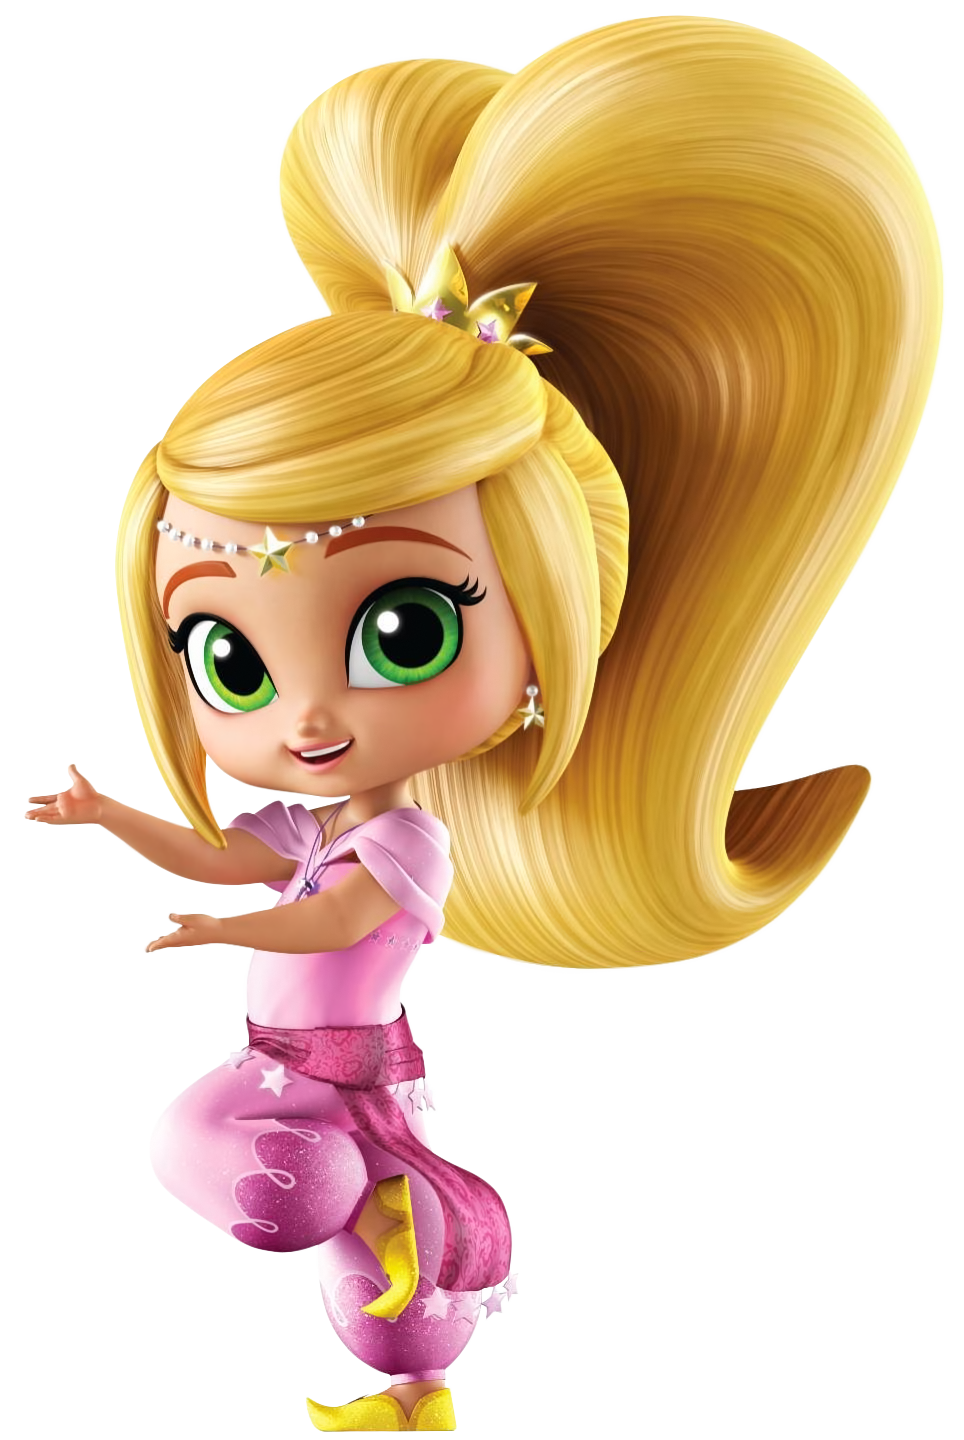 Leah Shimmer and Shine Transparent Cartoon Image​-Quality Free Image and Transparent PNG Clipart